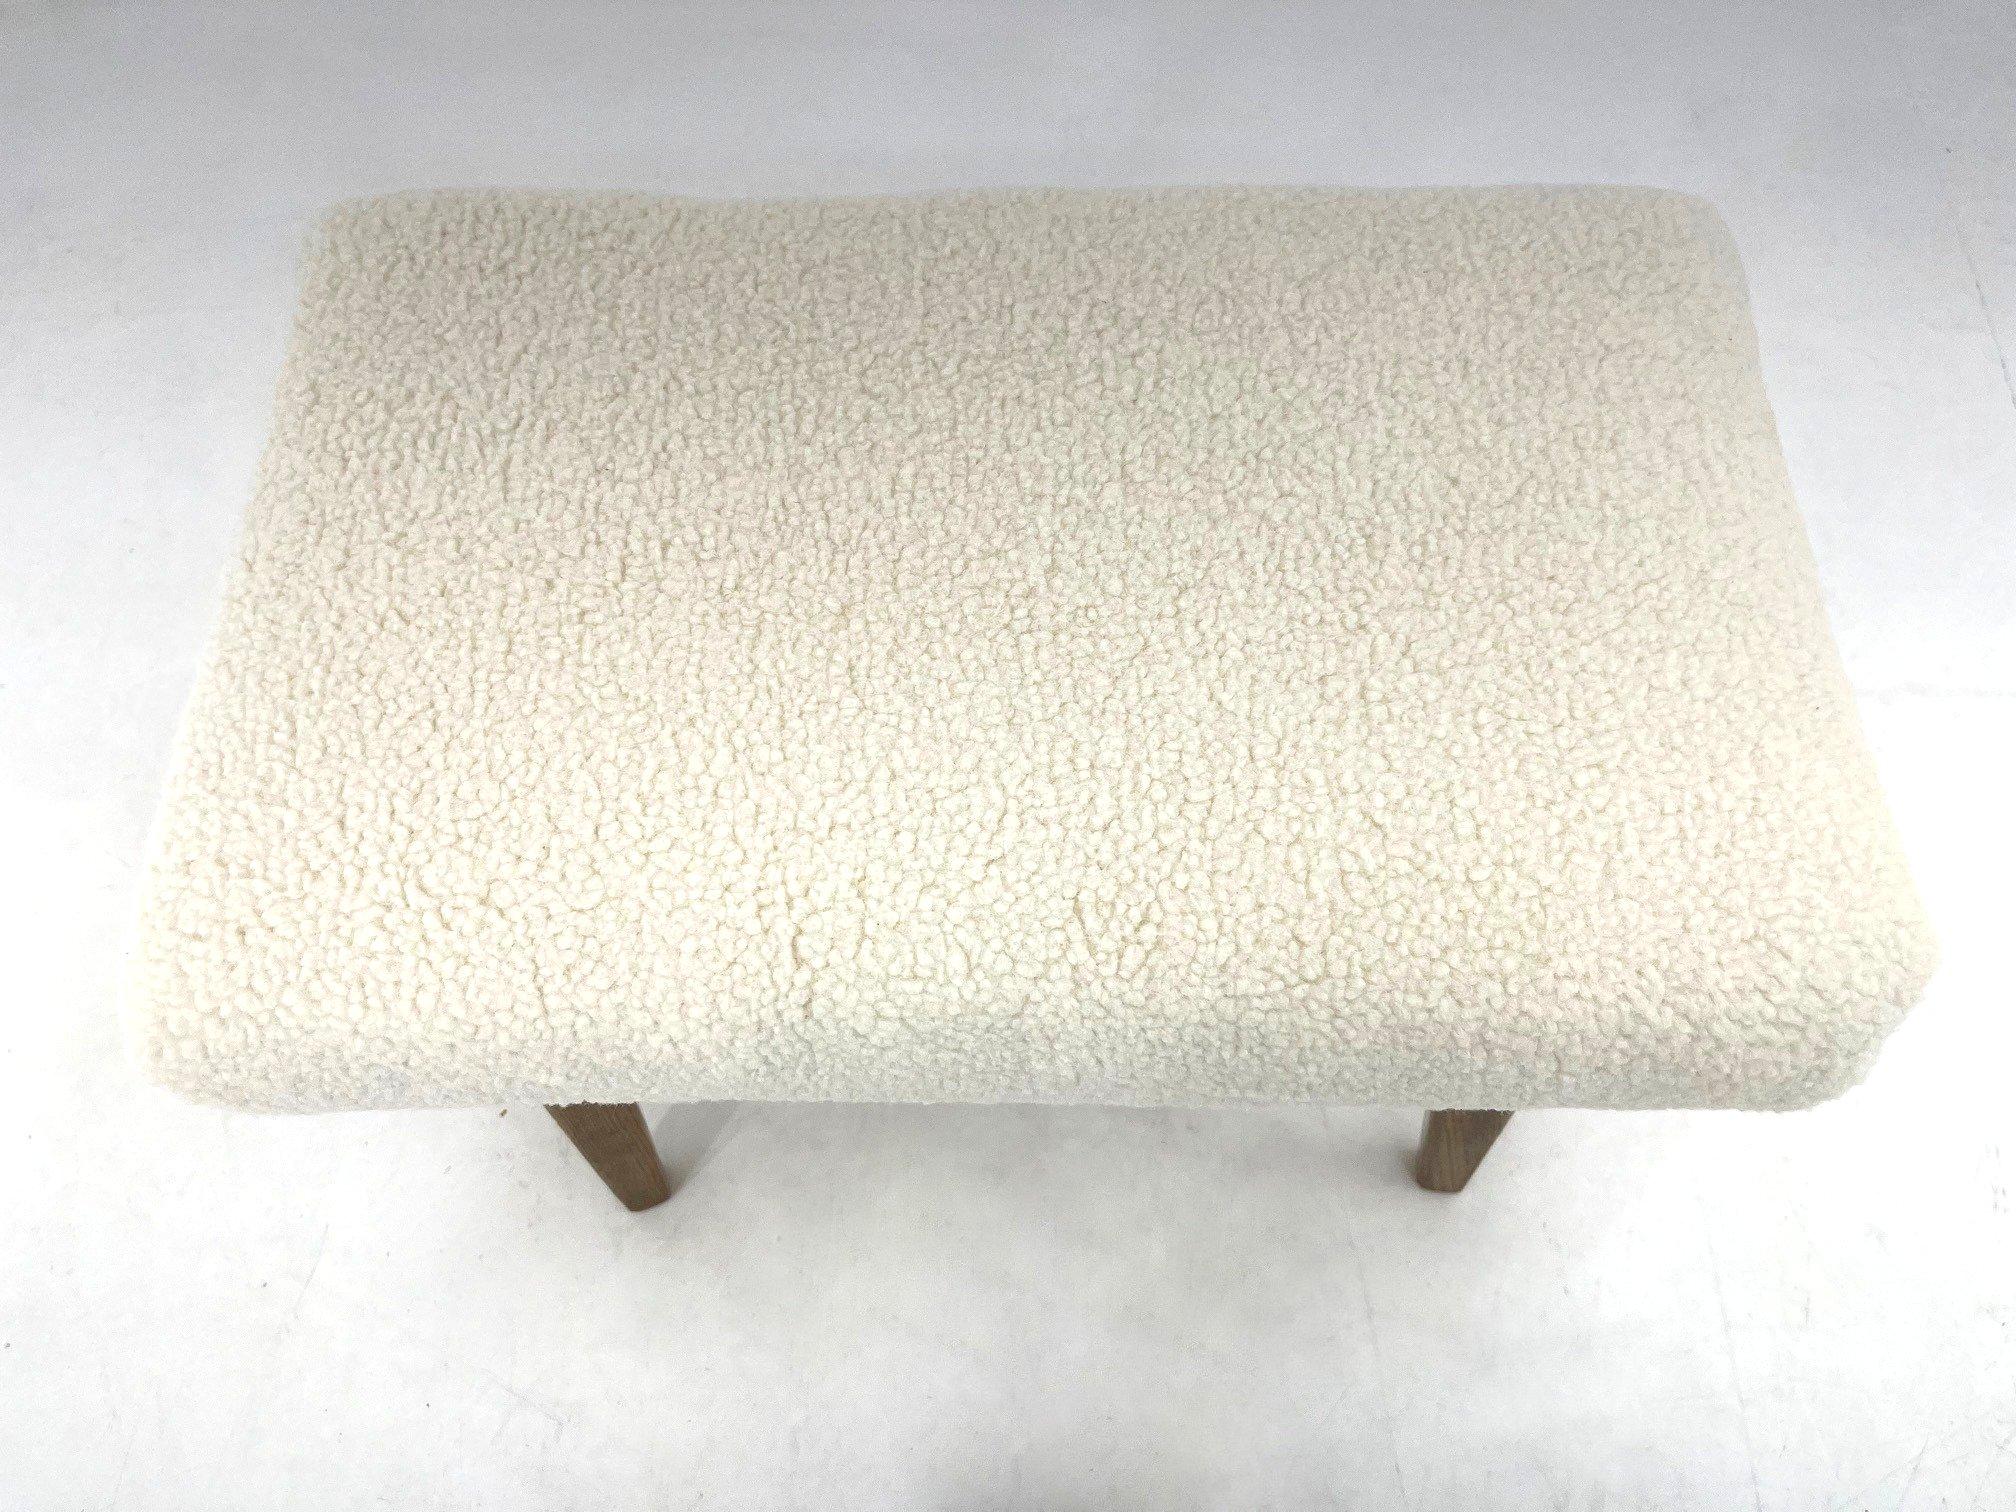 Late 20th Century Mid-Century Stool in Sheep Skin Fabric, 1970's For Sale